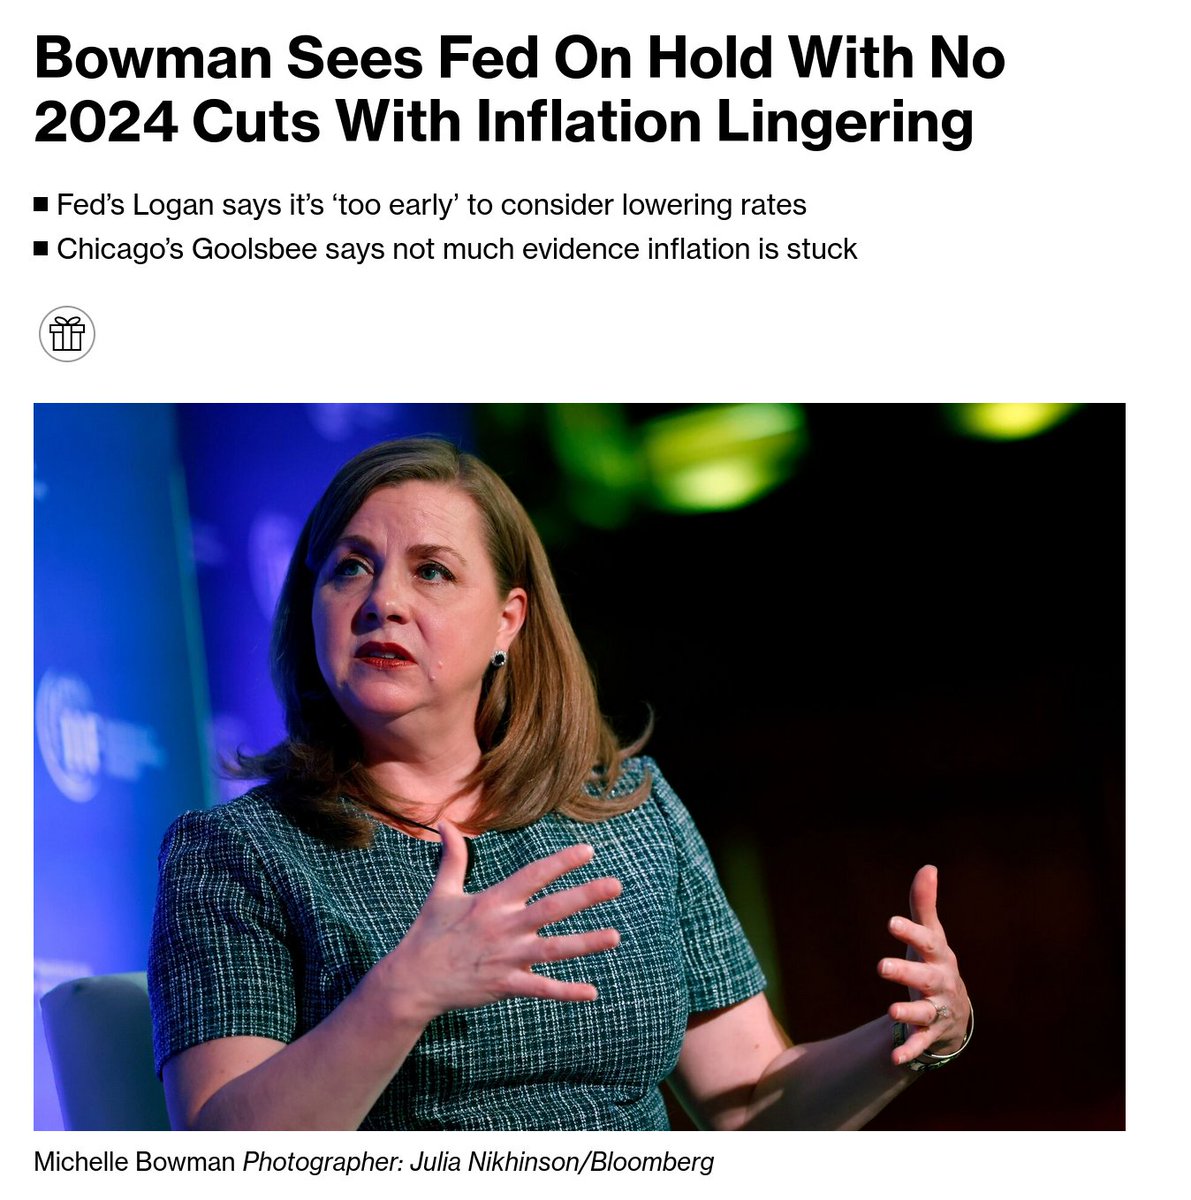 I still think the Fed cuts and it ends up being a policy mistake, but Bowman isn't wrong in her reasoning. Stating concerns about inflation lingering is top of mind for many. Easier monetary policy could further accelerate it if the economy does not weaken commensurately.